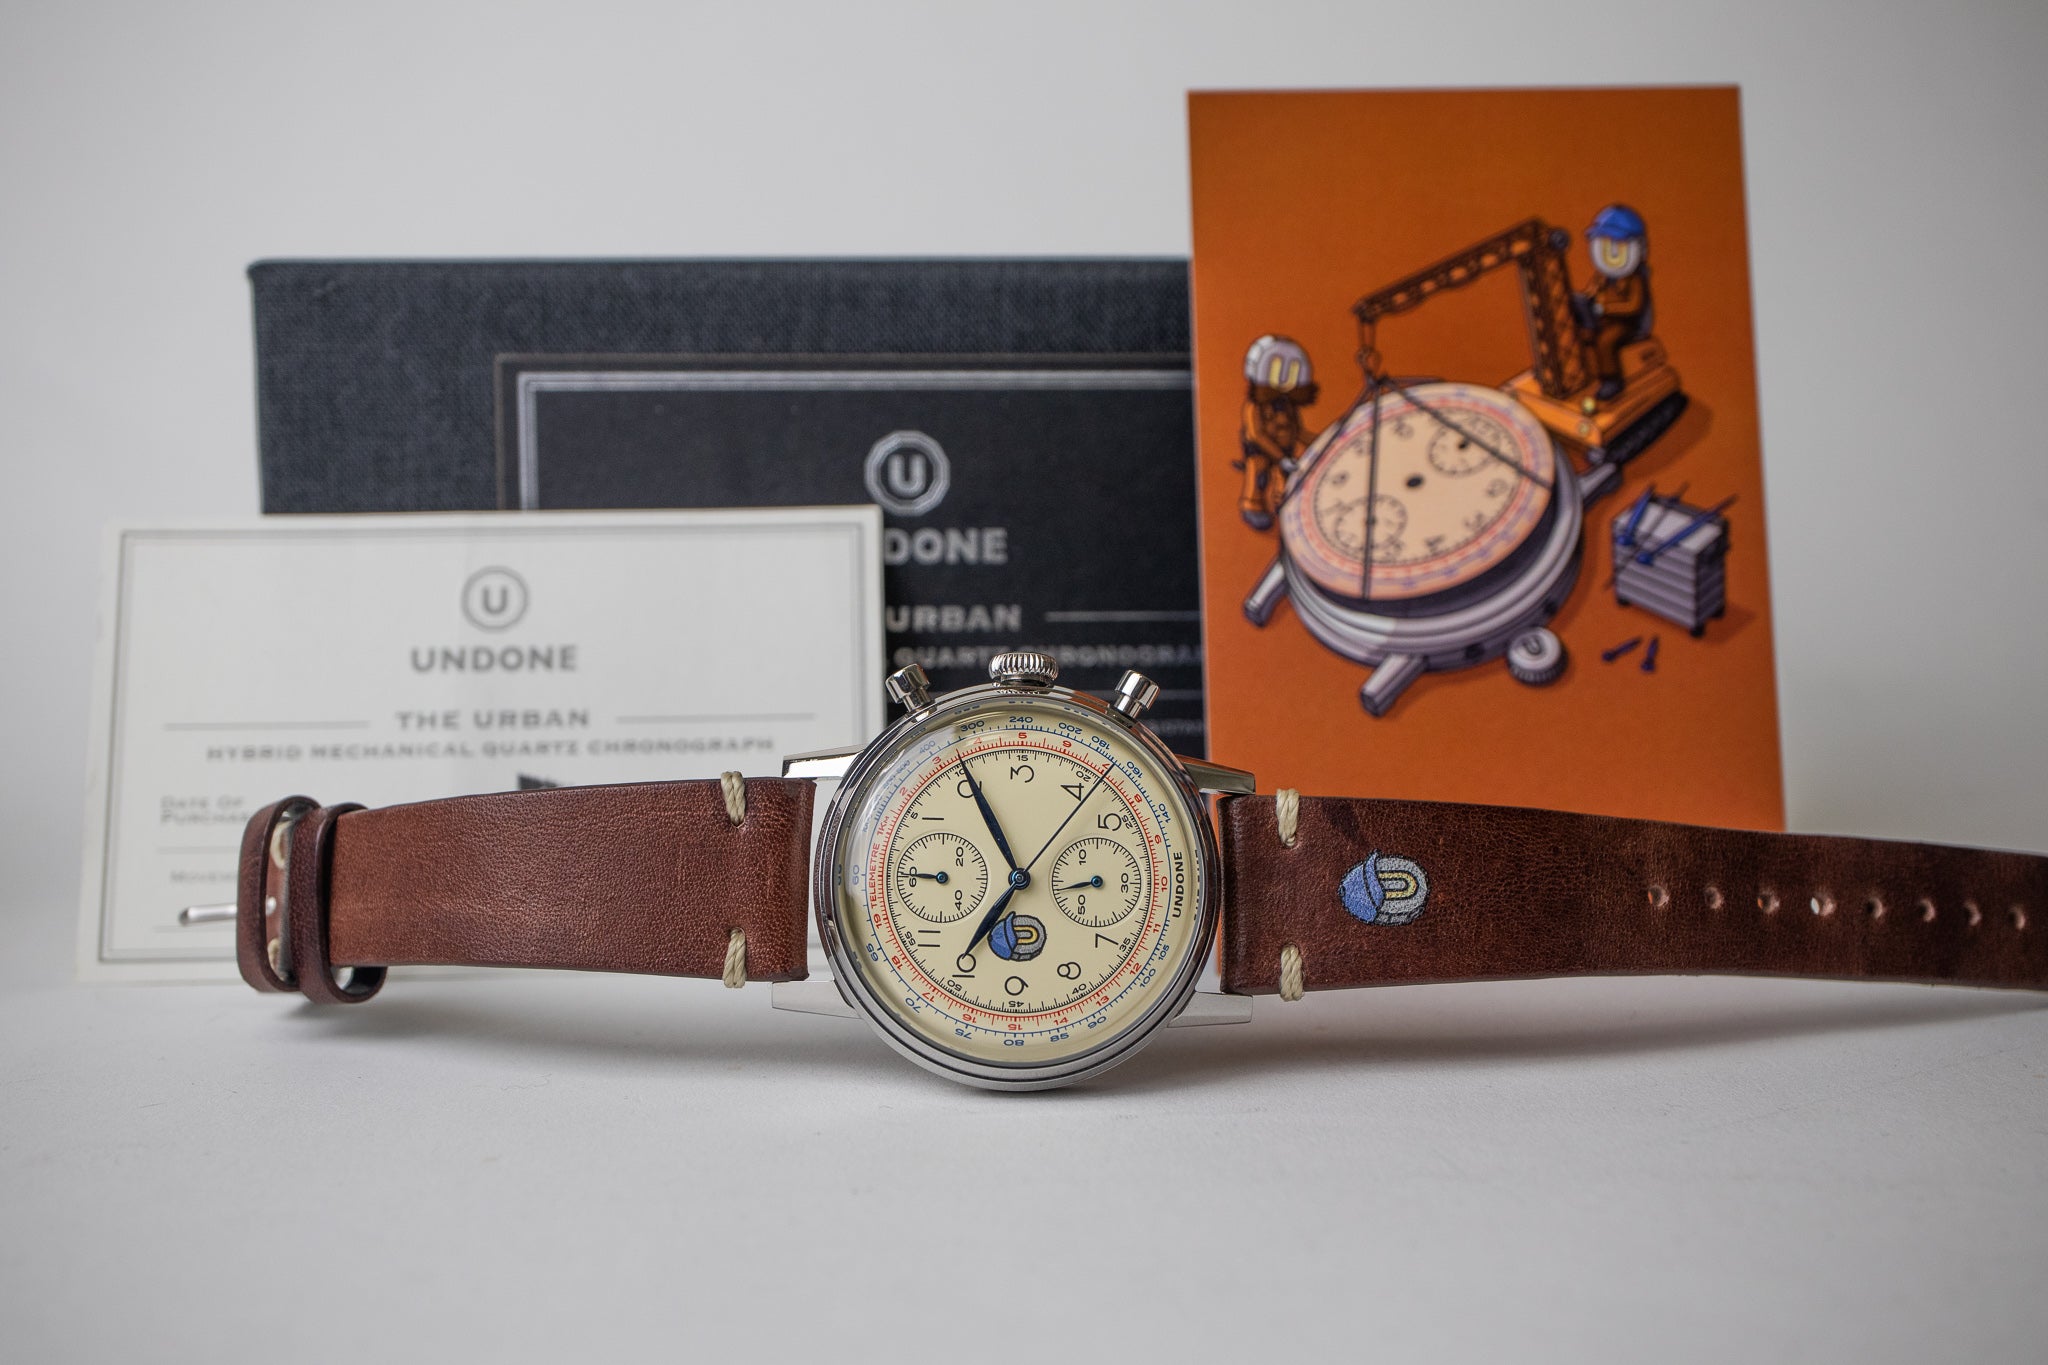 Undone Killy X Watches and Pencils Limited Edition